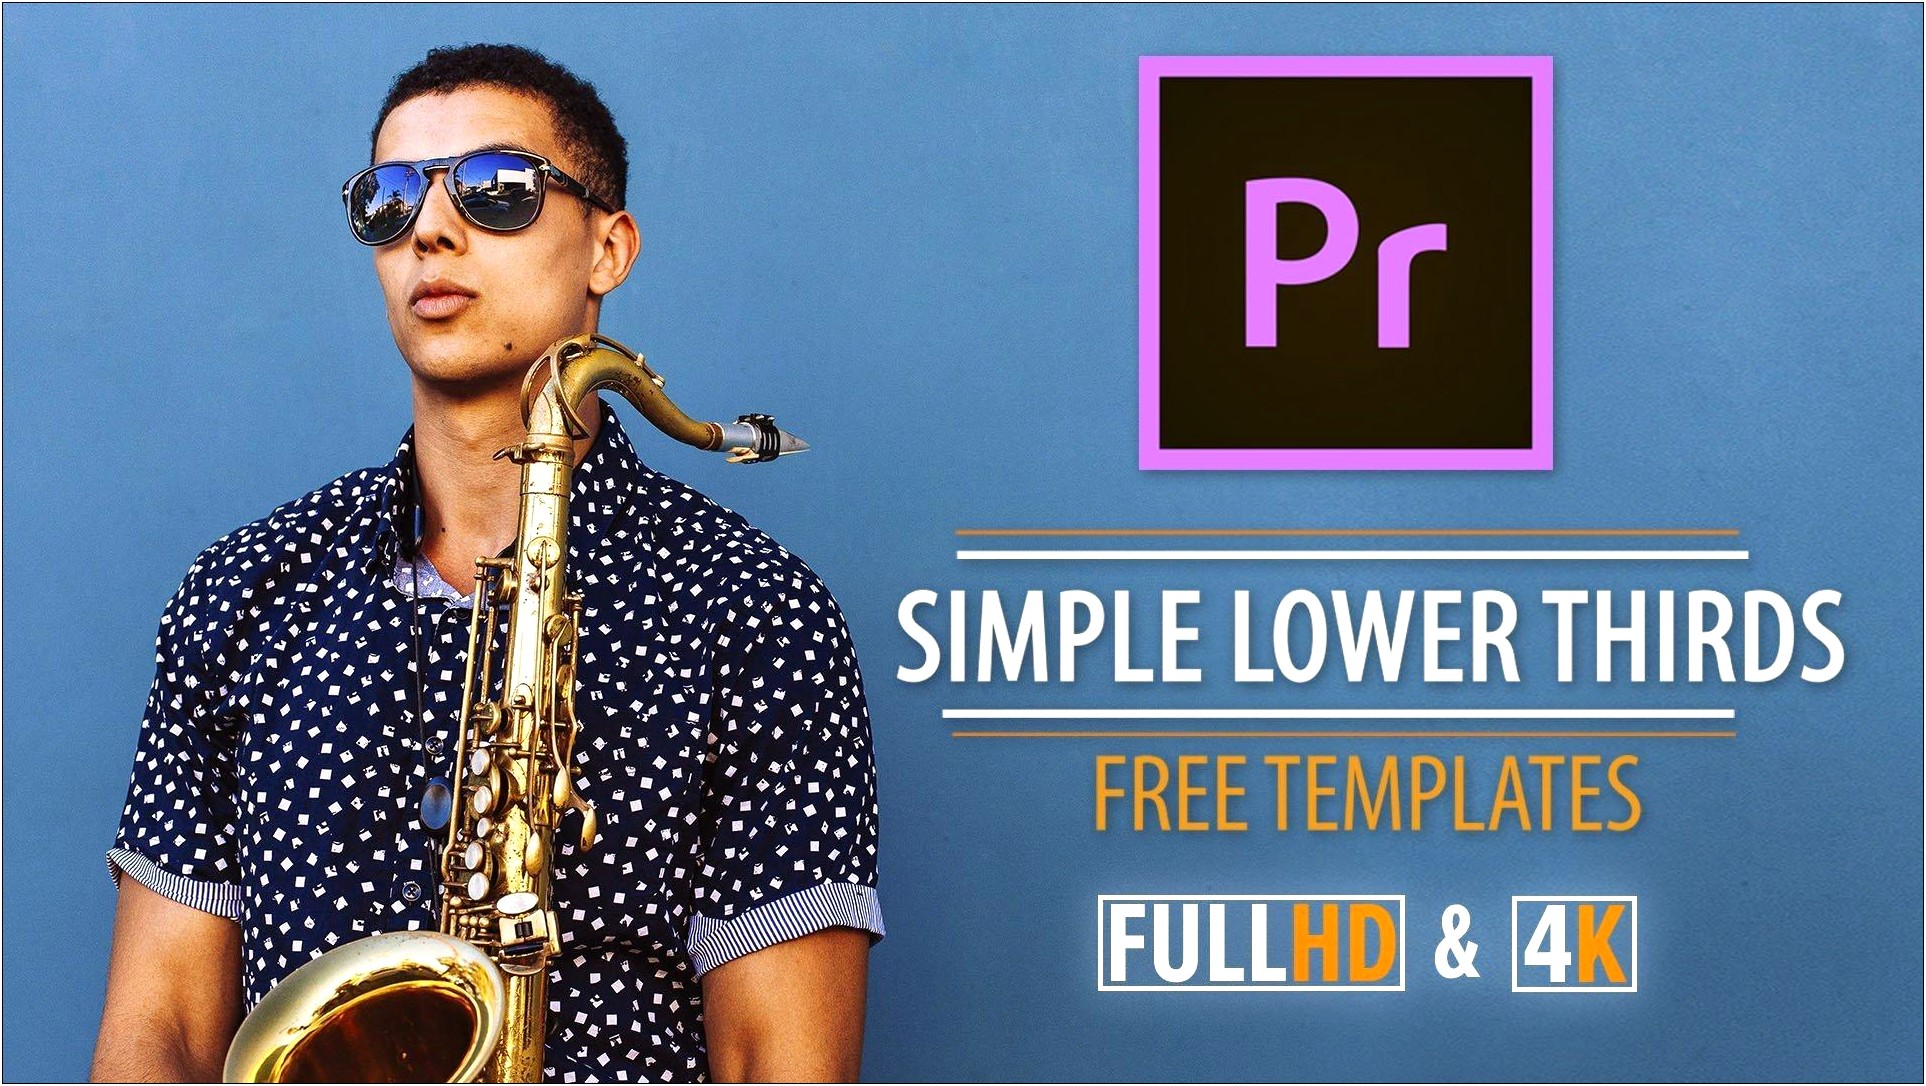 Free Premiere Pro Lower Thirds Templates